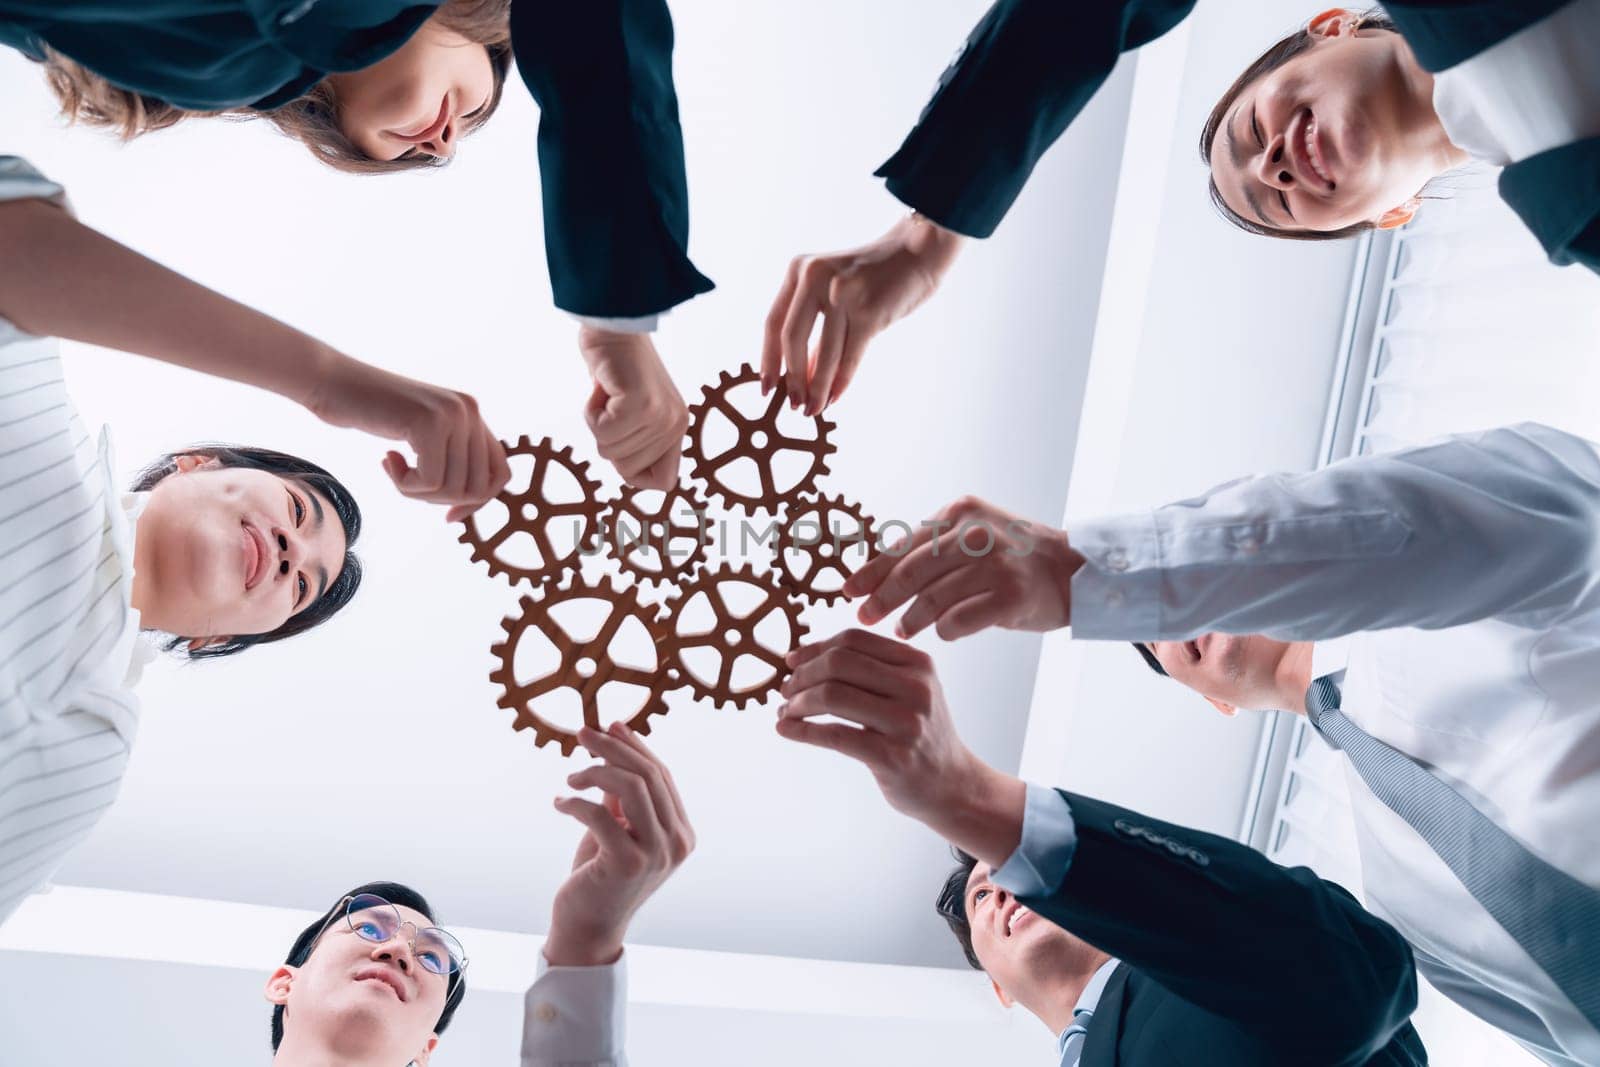 Hand holding wooden gear by businesspeople wearing suit for harmony synergy in office workplace. Bottom view office worker hand make chain of gear into collective unity form.